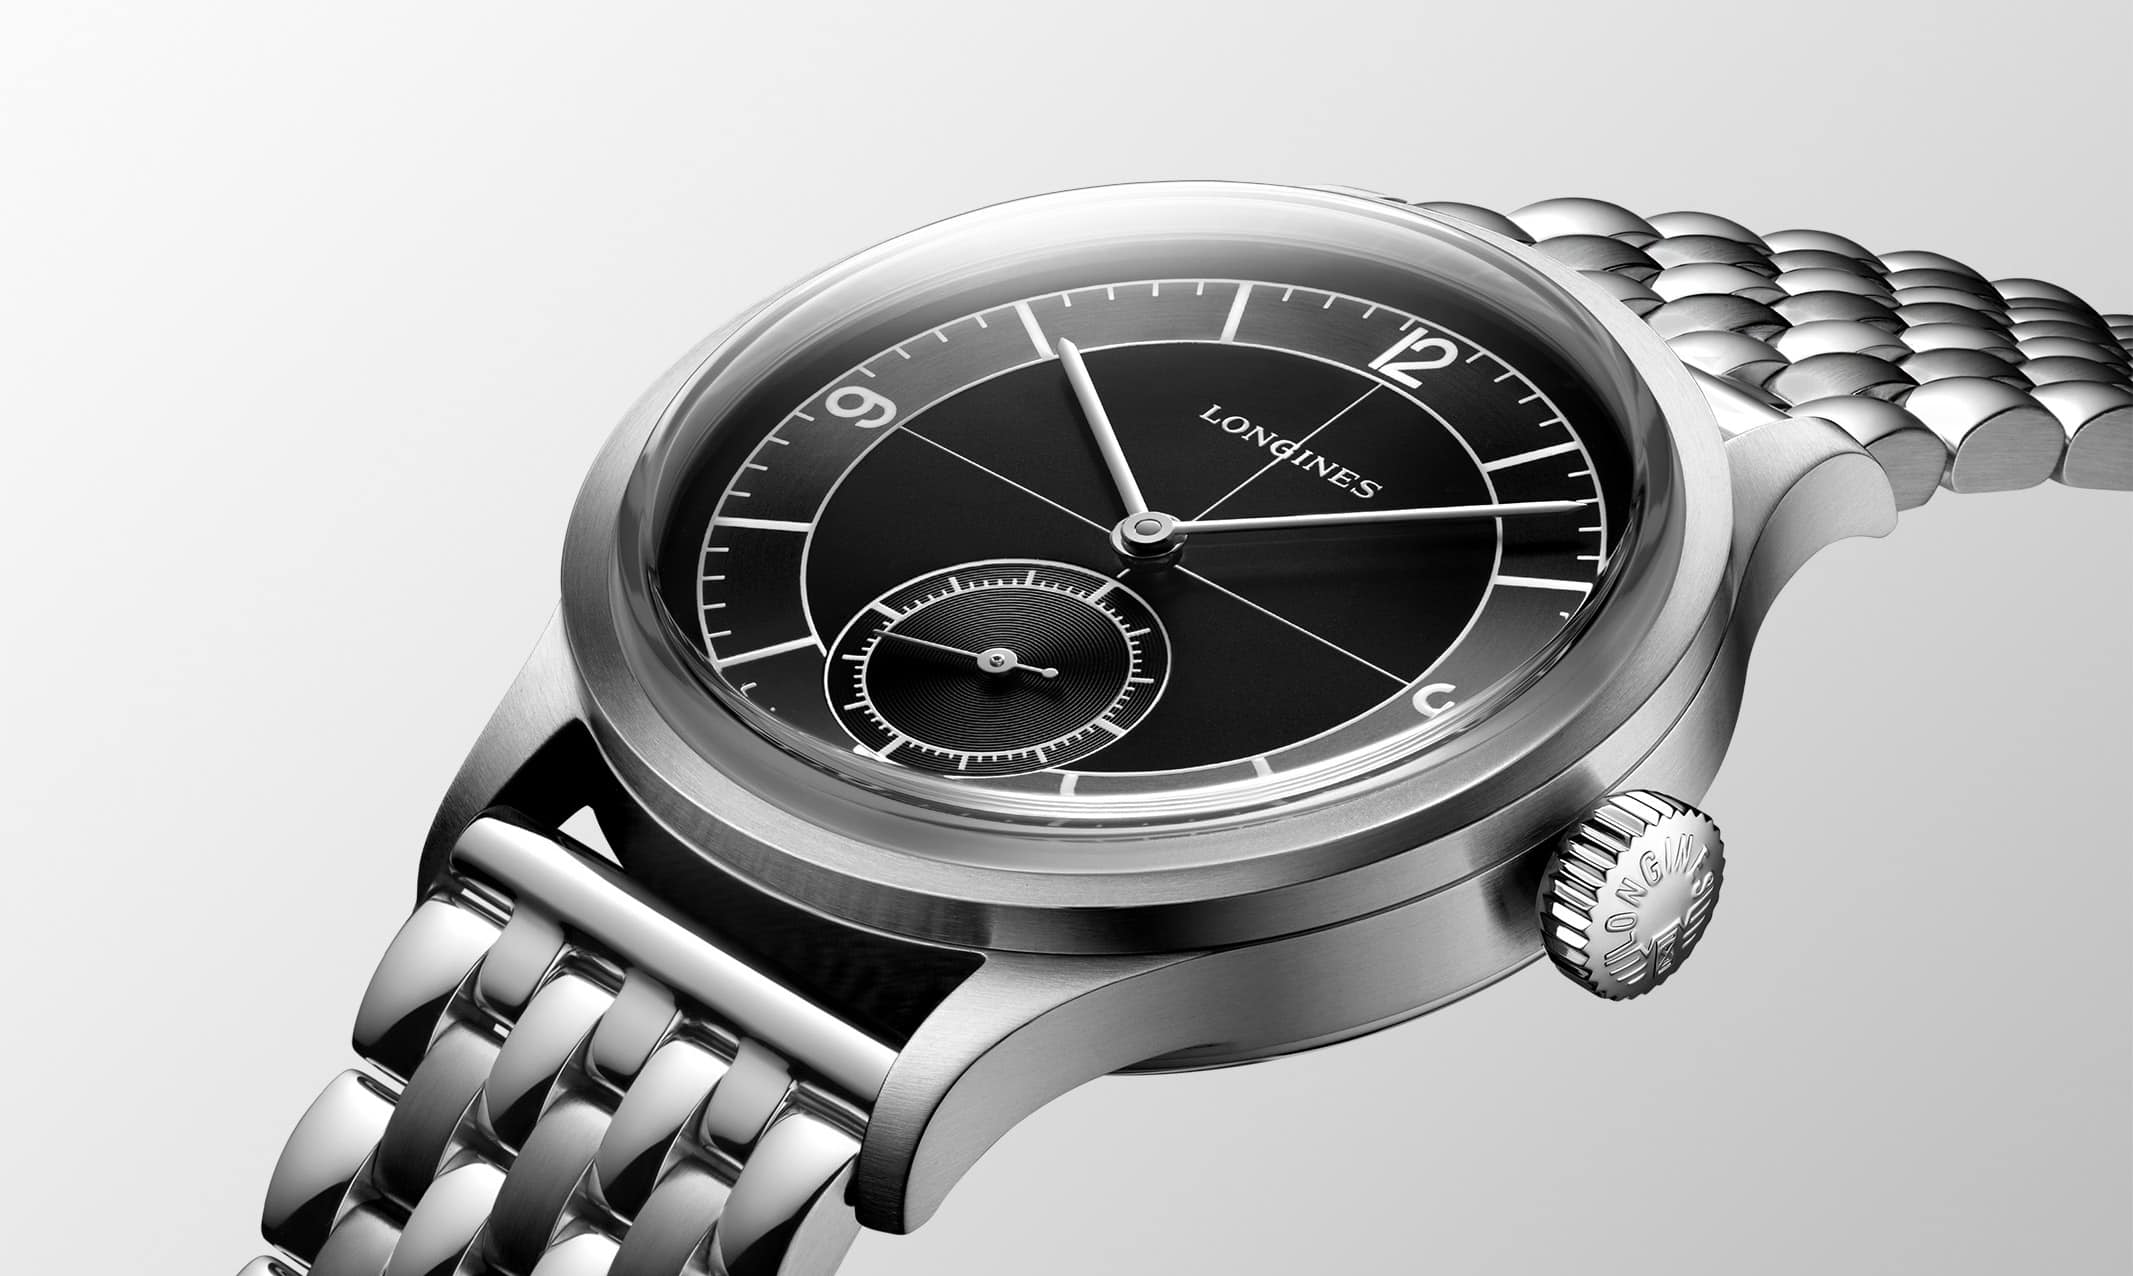 Introducing The Longines Heritage Classic with Black Sector Dial - Worn ...